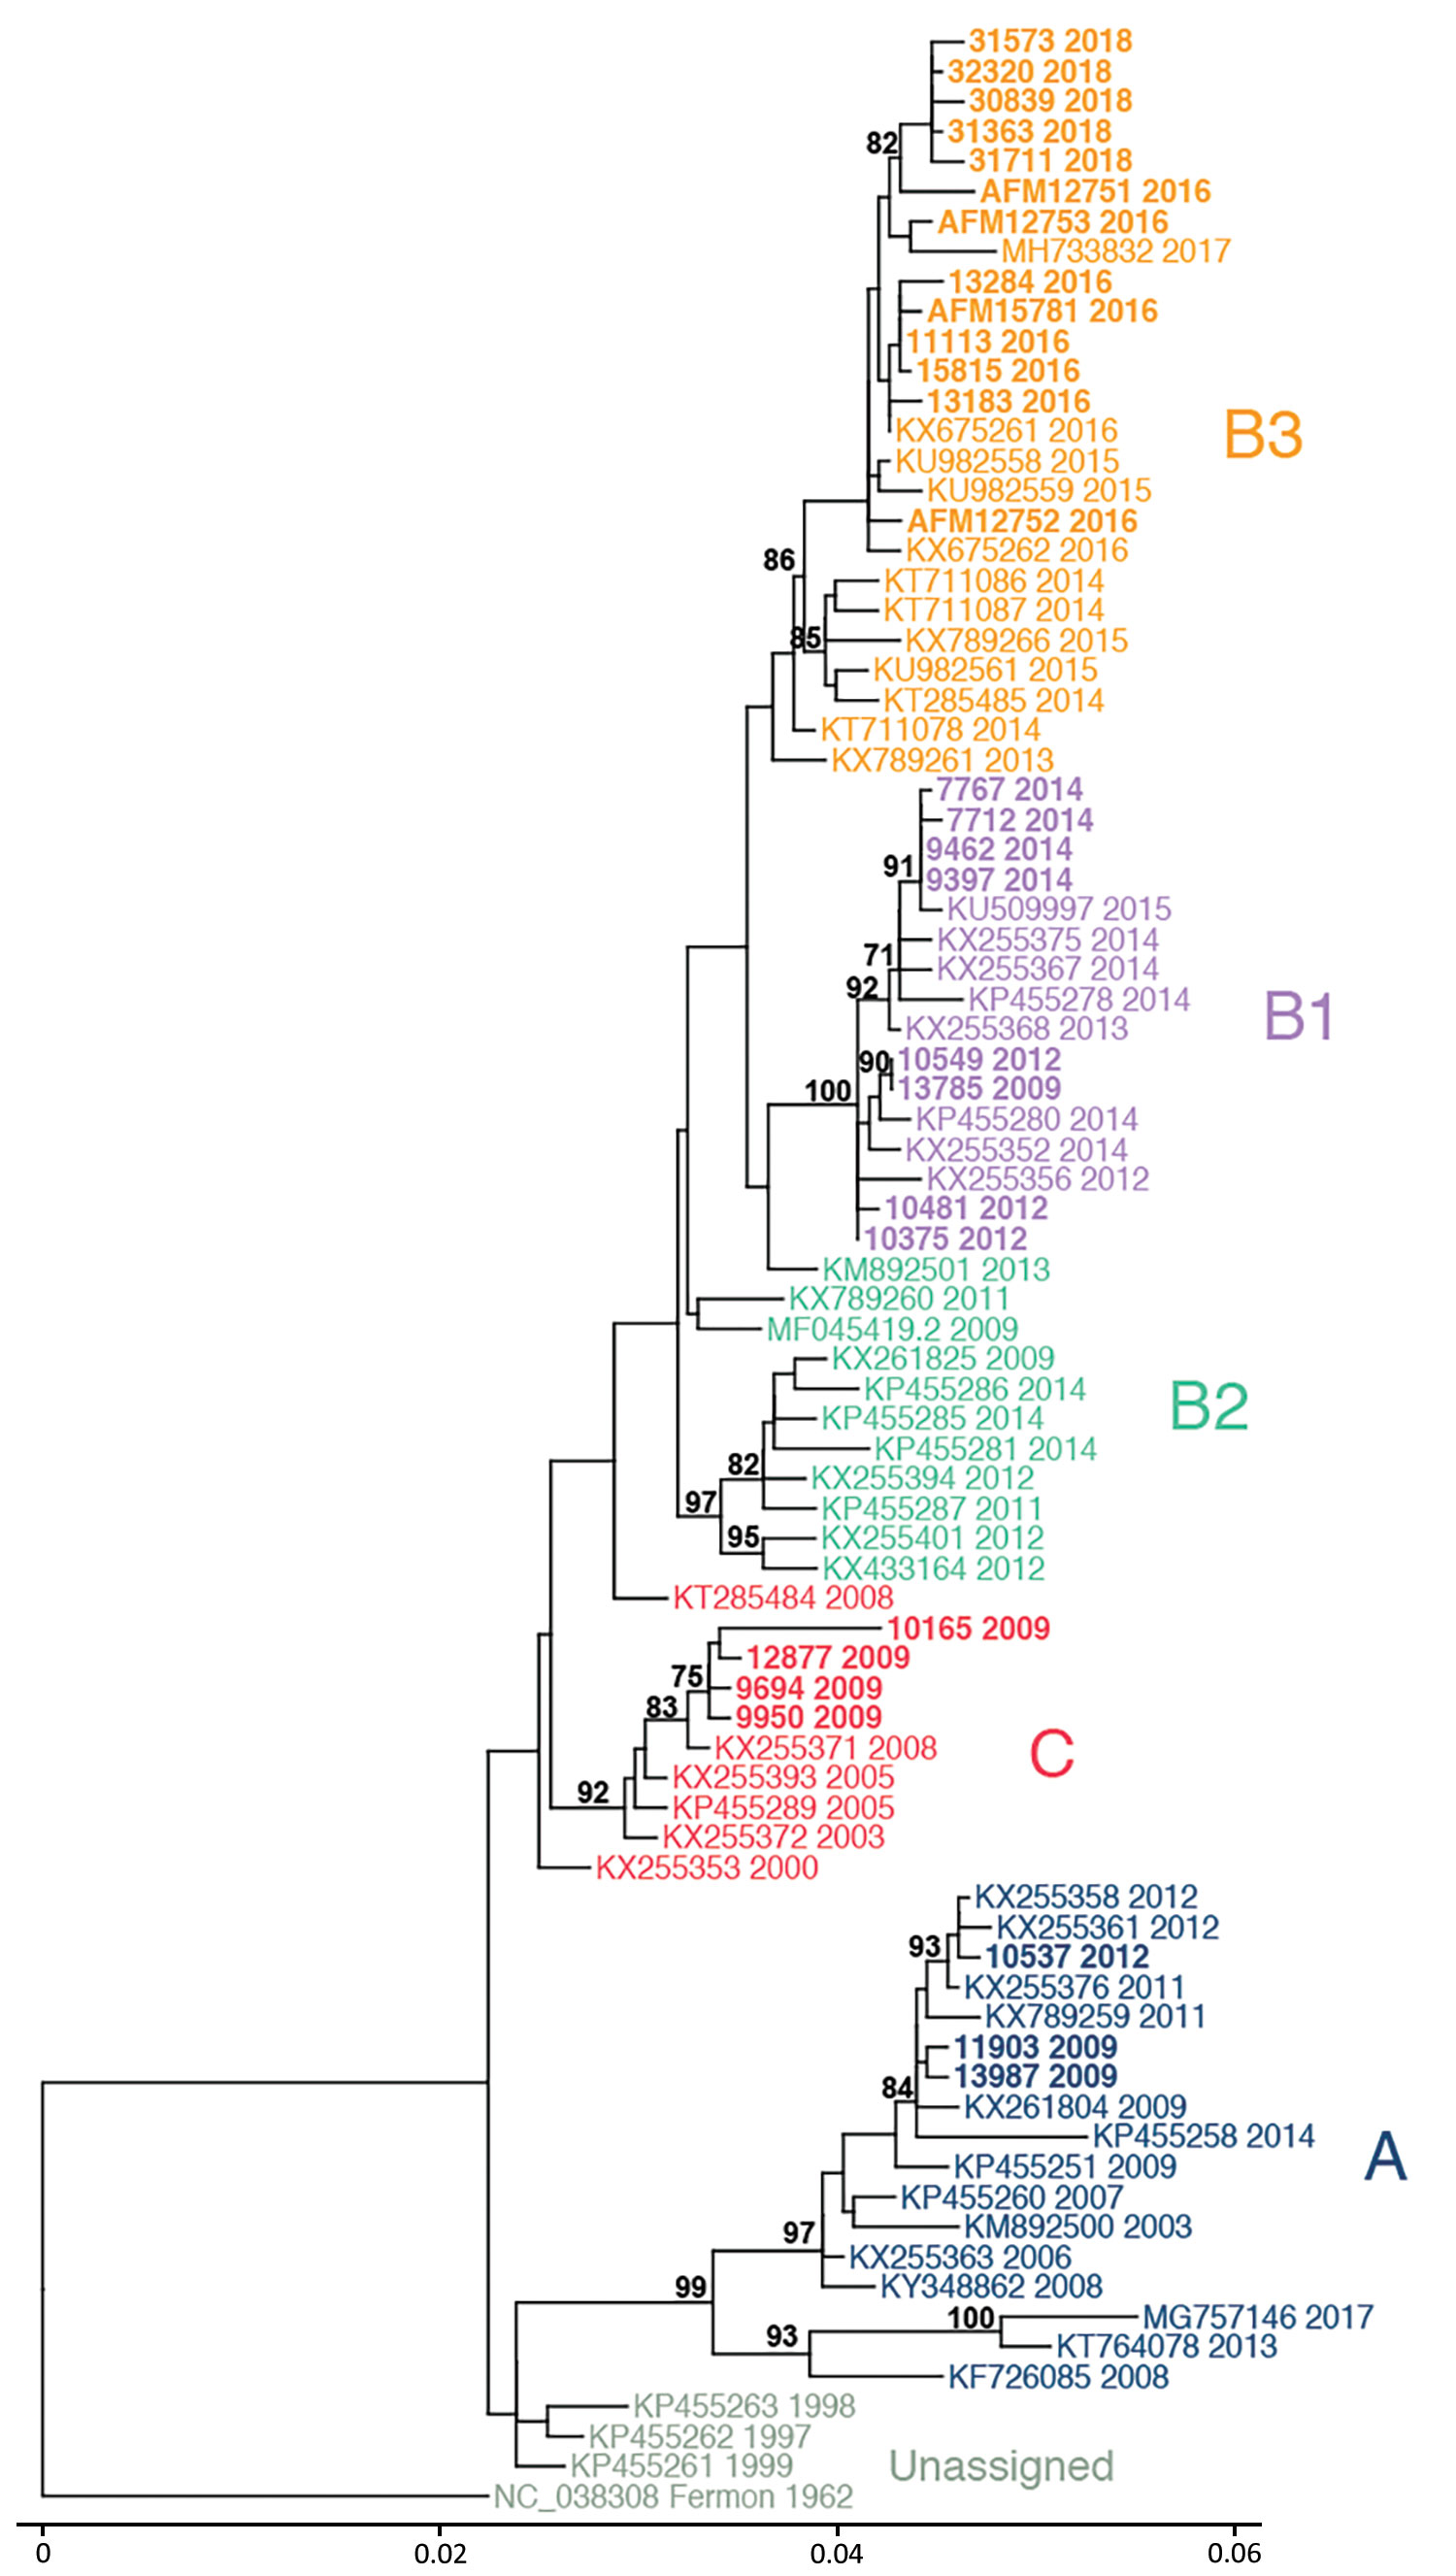 Phylogenetic relationships between Philadelphia whole enterovirus D68 (EV-D68) genomes, including AFM cases, Philadelphia, Pennsylvania, USA, 2009–2018. EV-D68 polyprotein sequences from GenBank (n = 55) and this study (n = 28) were used to build a maximum-likelihood tree. EV-D68 clades, defined in prior publications, are indicated. Sequences from this study are indicated in bold, and AFM cases are indicated with that prefix. AFM, acute flaccid myelitis. Scale bar indicates nucleotide substituti